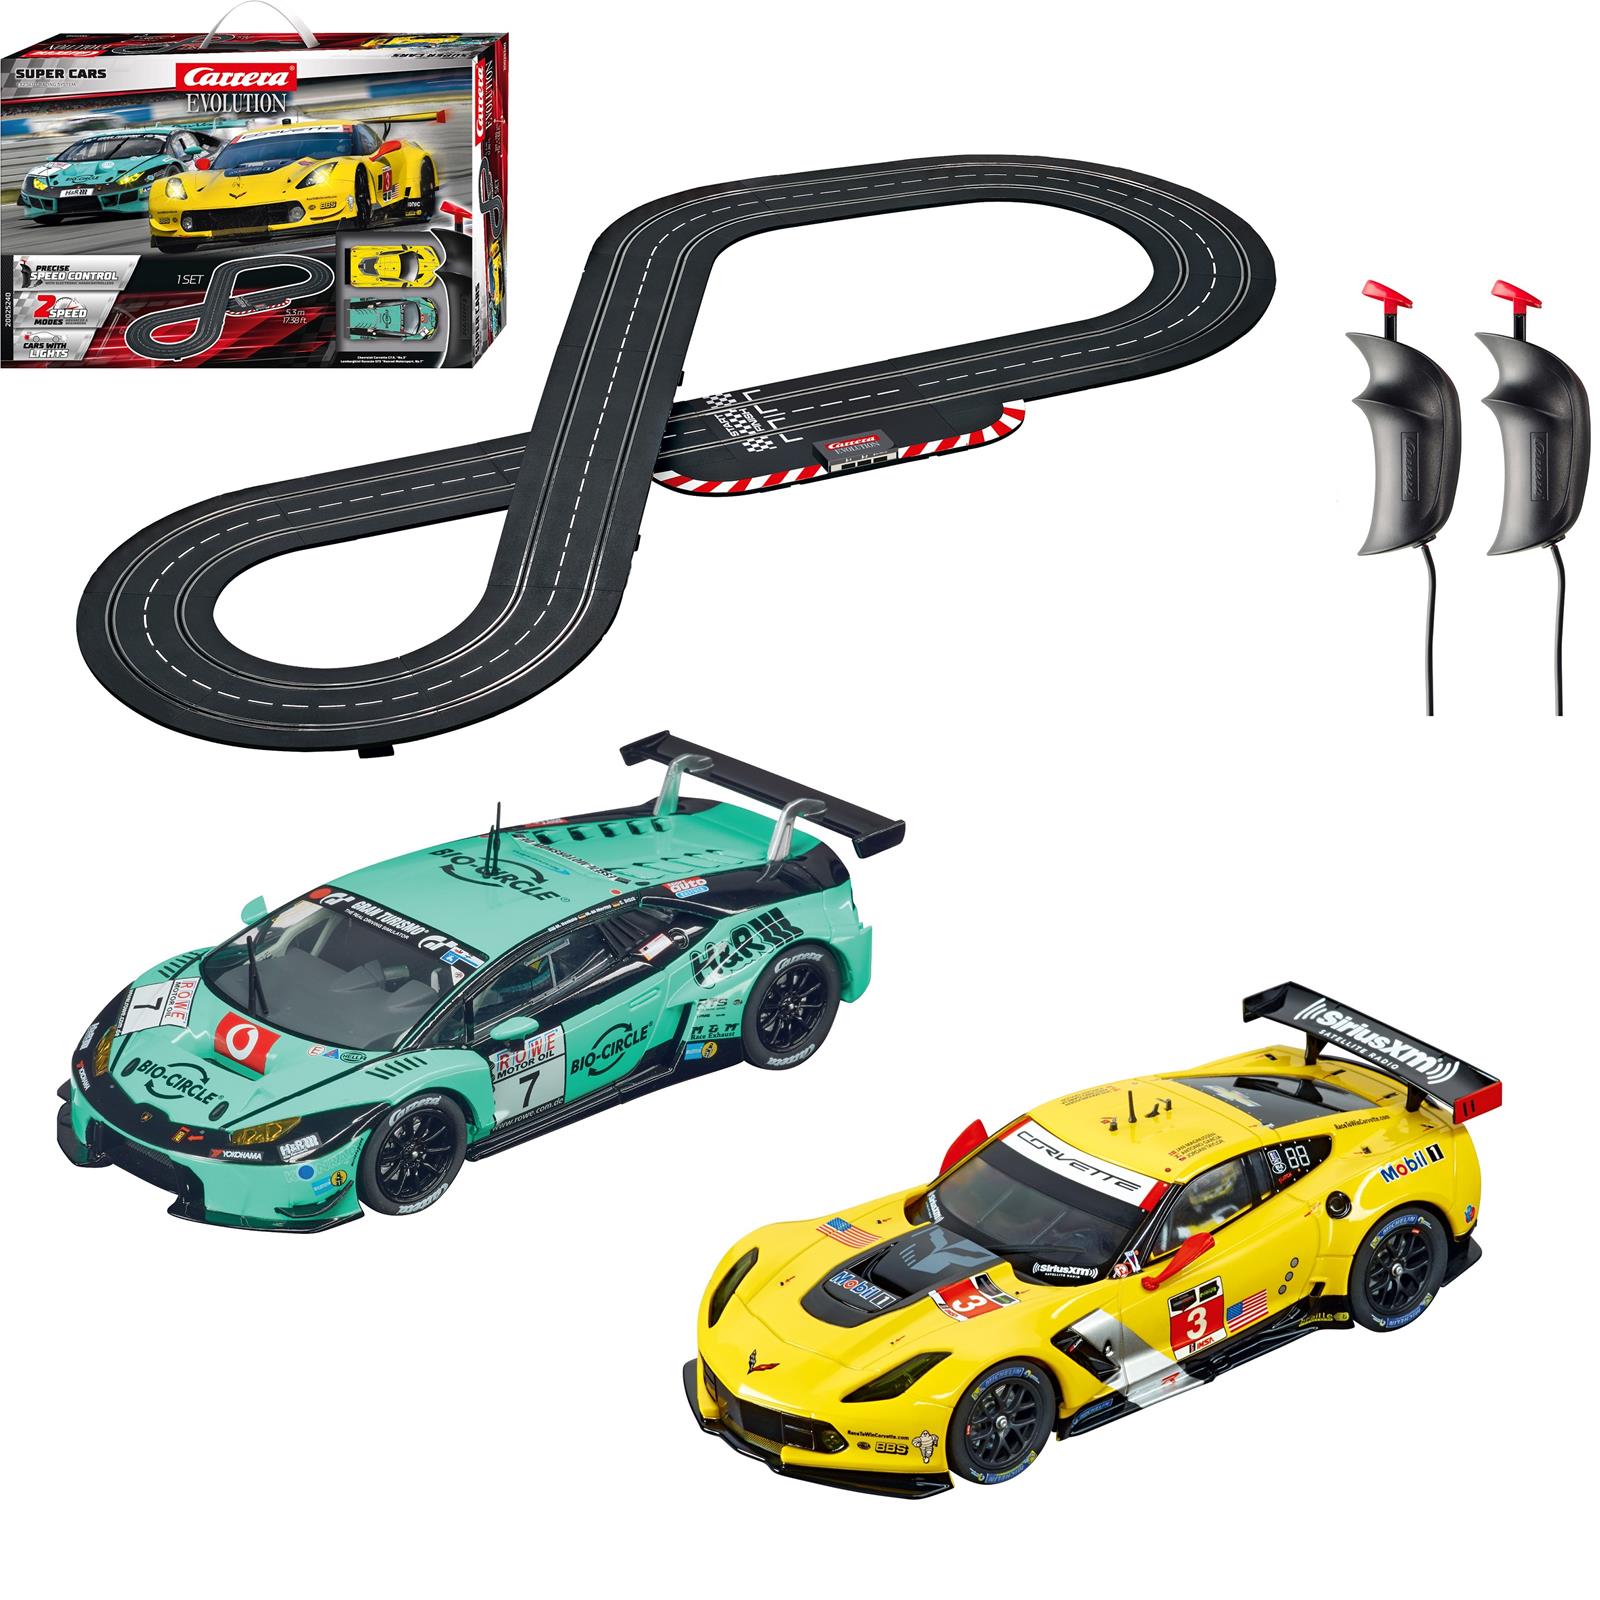 – Slot cars and accessories in 1/32 scale